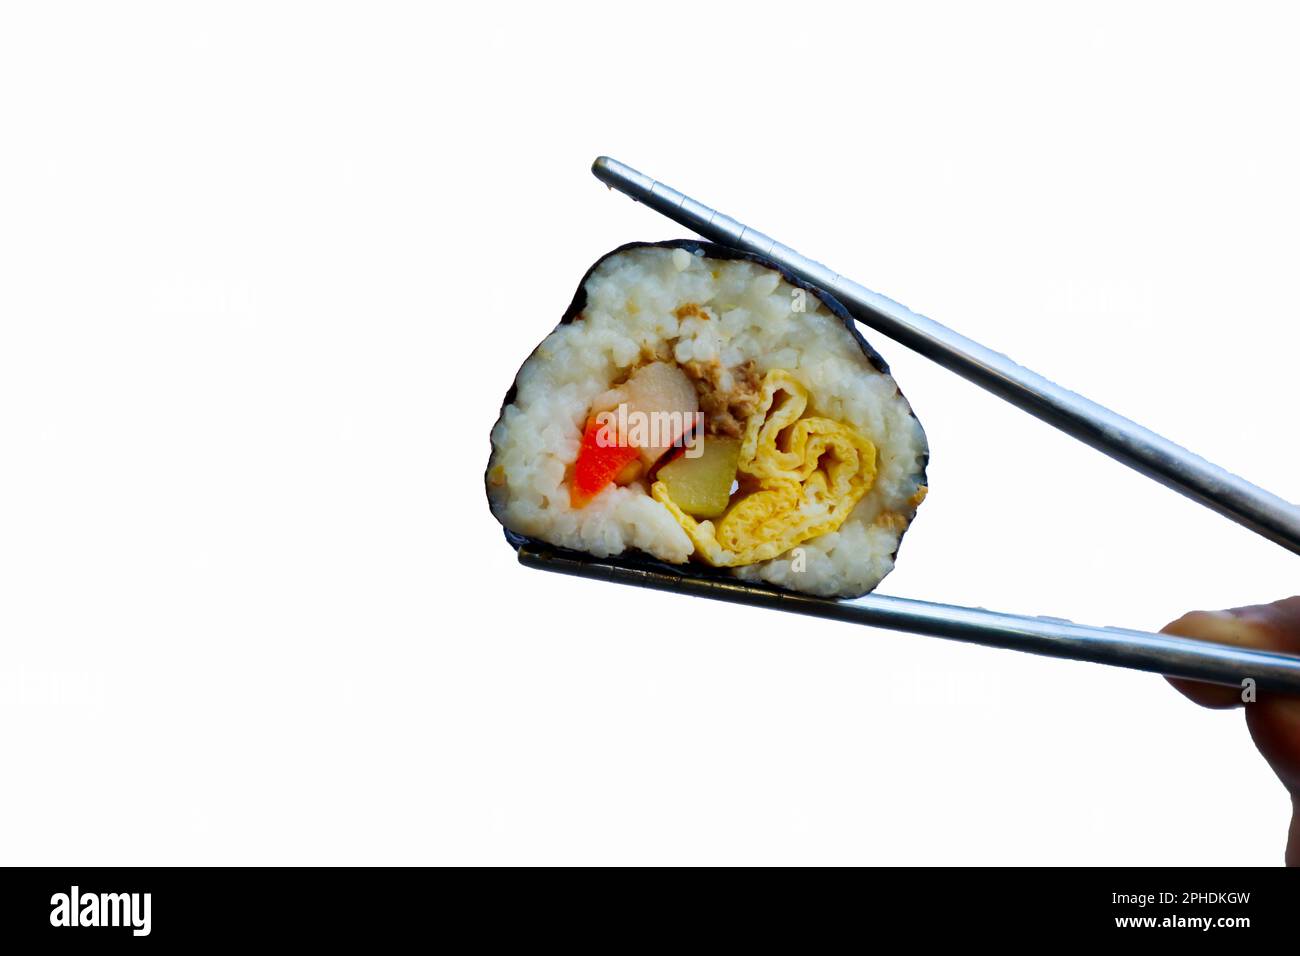 kimbap or gimbap is Korean roll Gimbap(kimbob) made from steamed white rice (bap) and various other ingredients, kimbab and chopstick Stock Photo